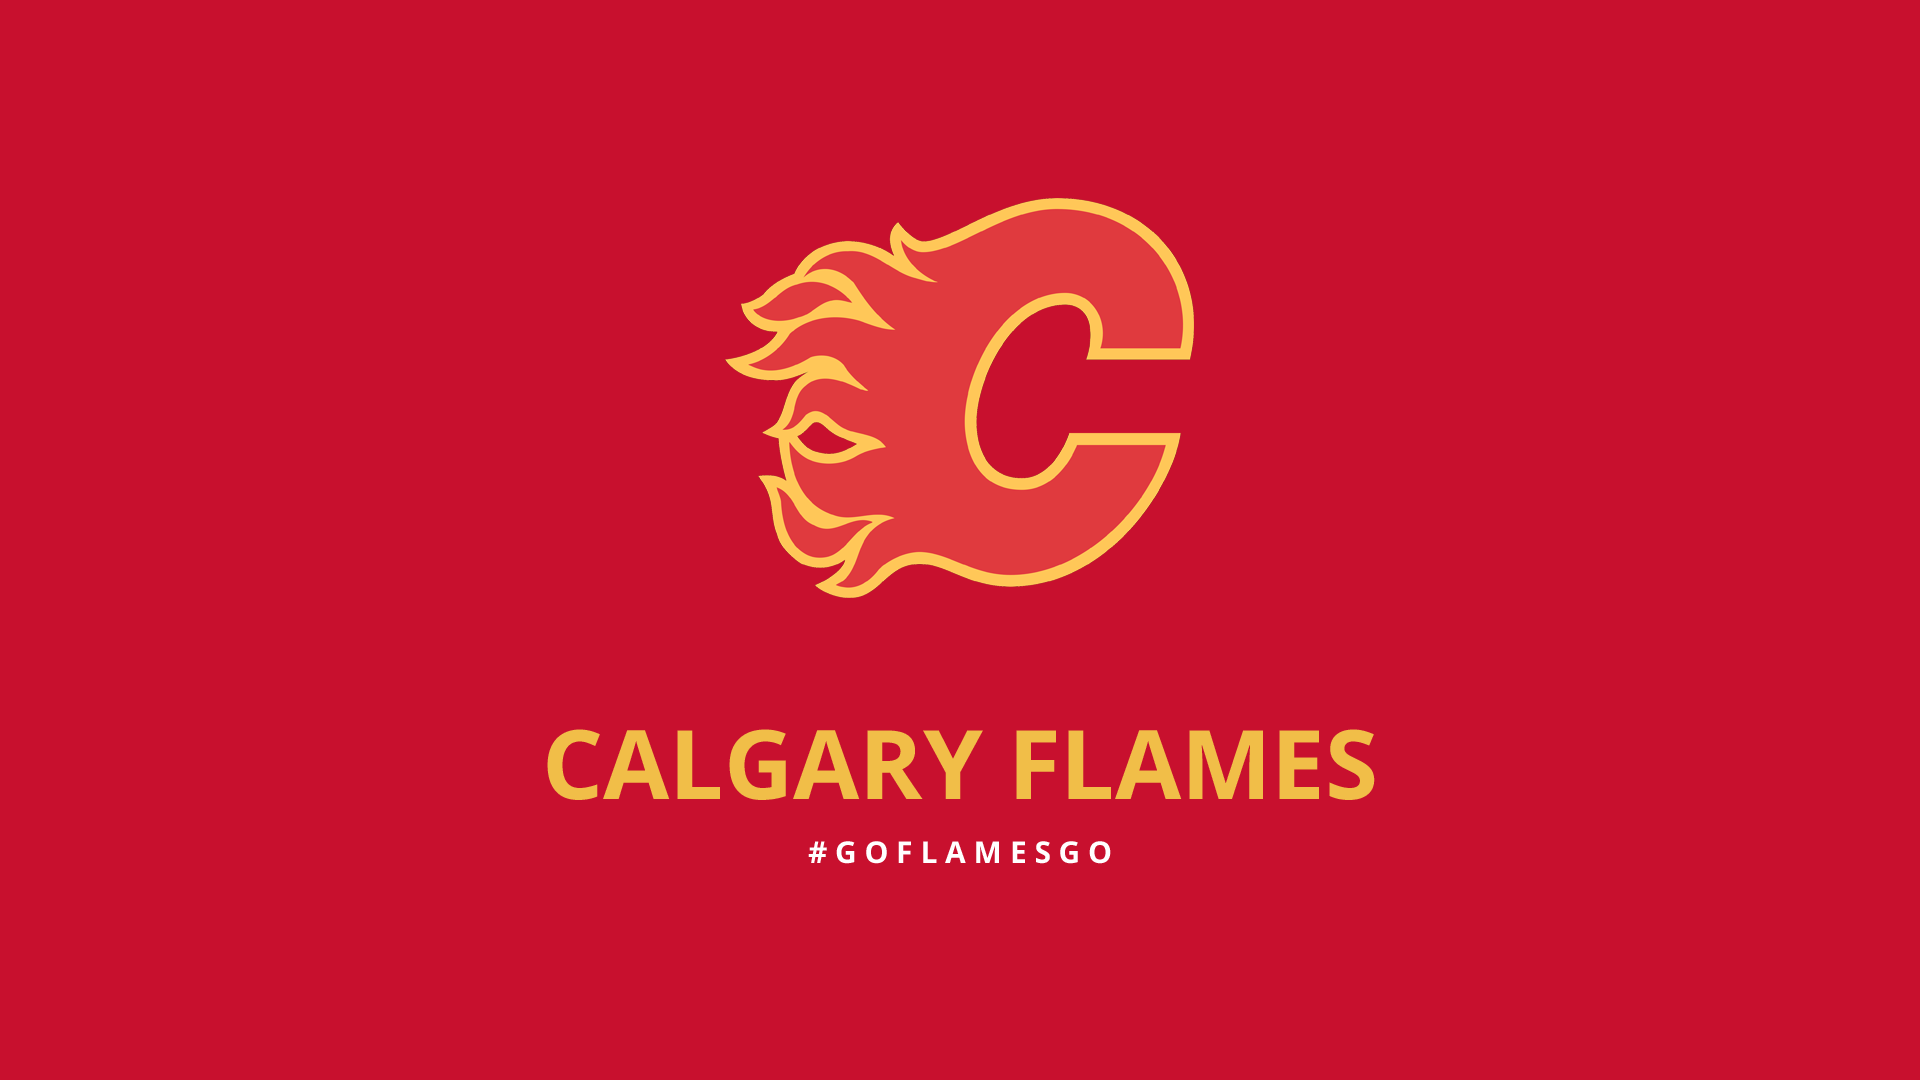 Minimalist Calgary Flames wallpaper by lfiore on